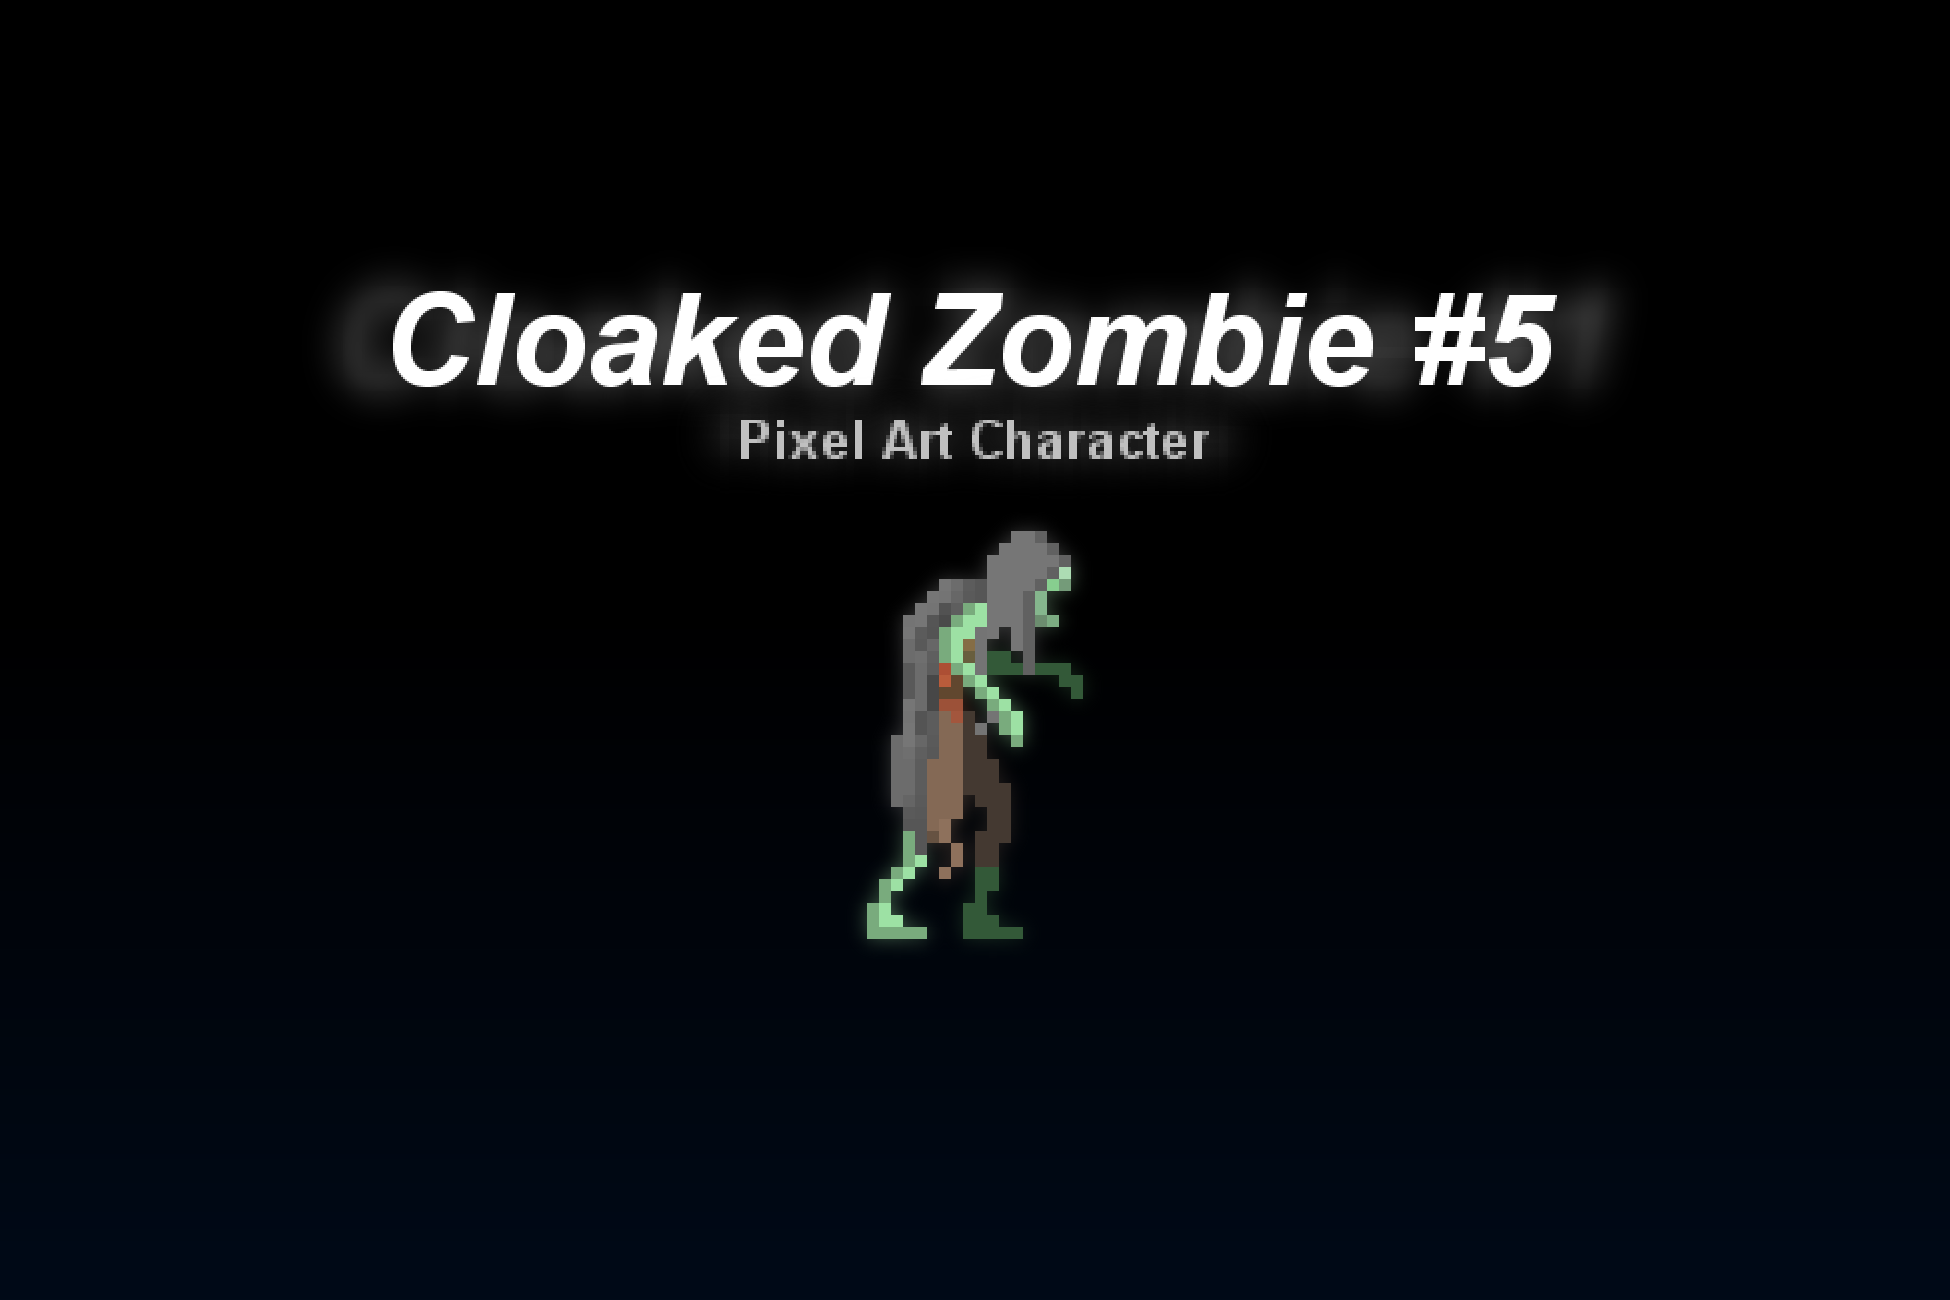 Cloaked Zombie #5 - Pixel Art Character